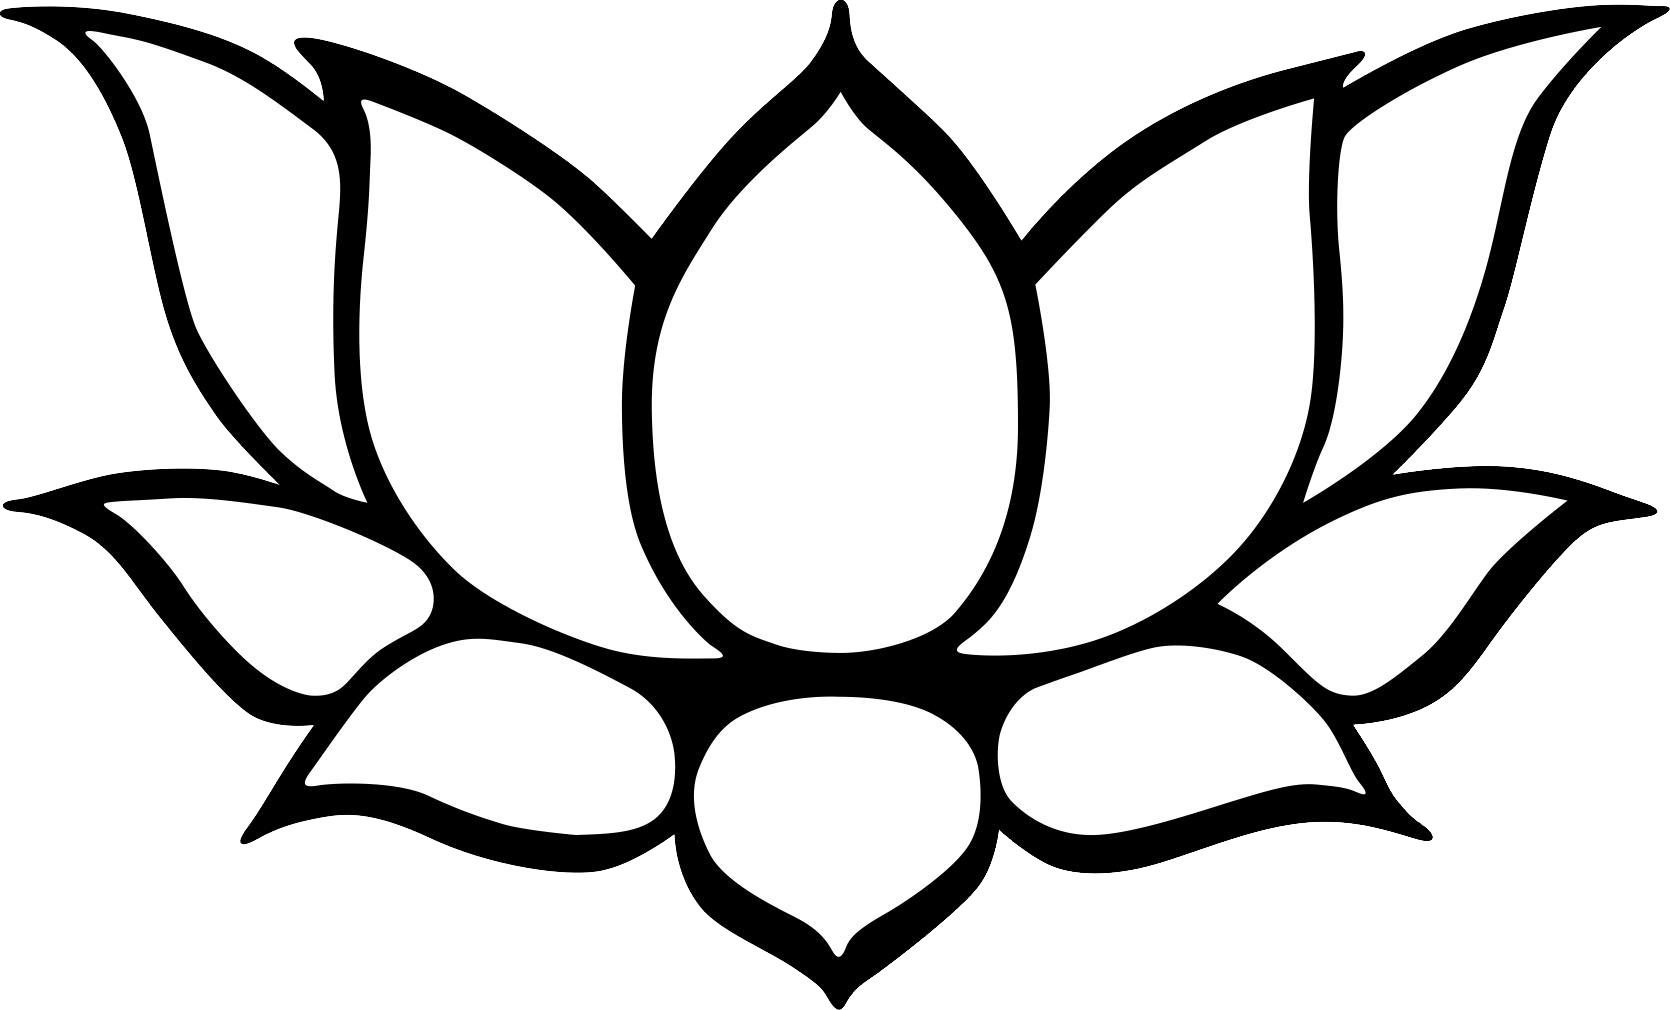 22 Lotus Line Drawing Free Cliparts That You Can Download To You